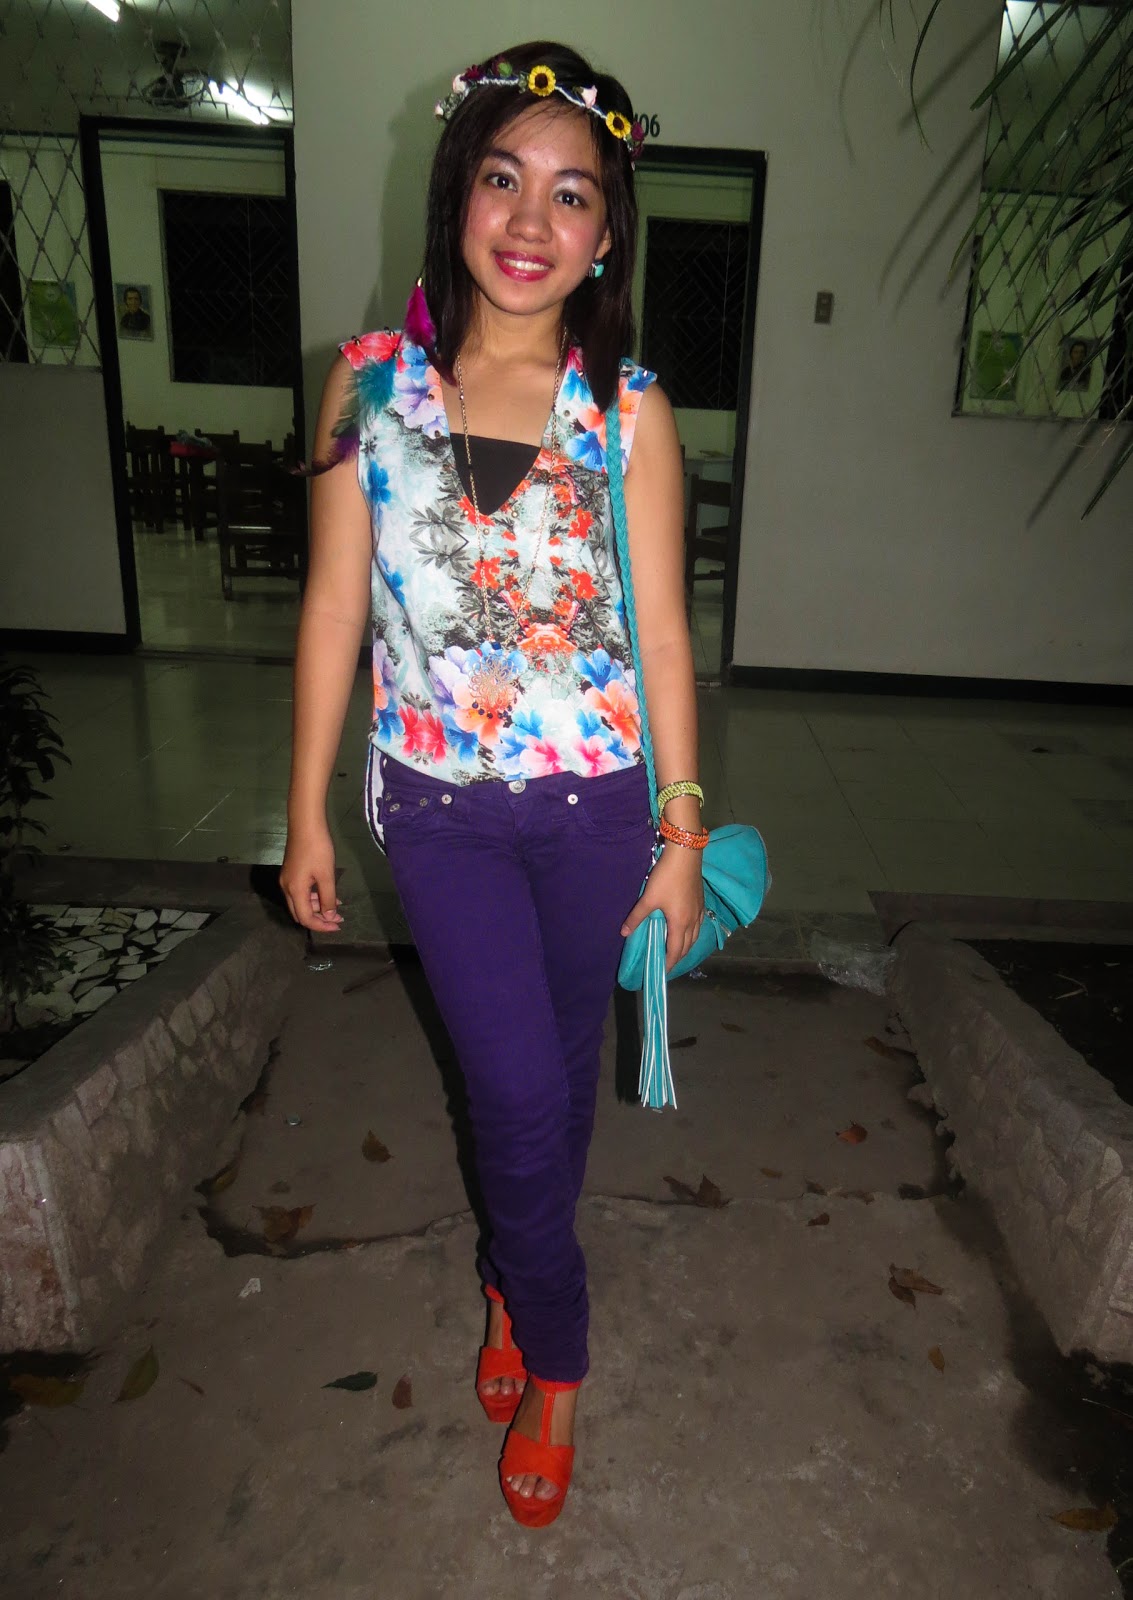 Indulged with Fashion: Acquaintance Party